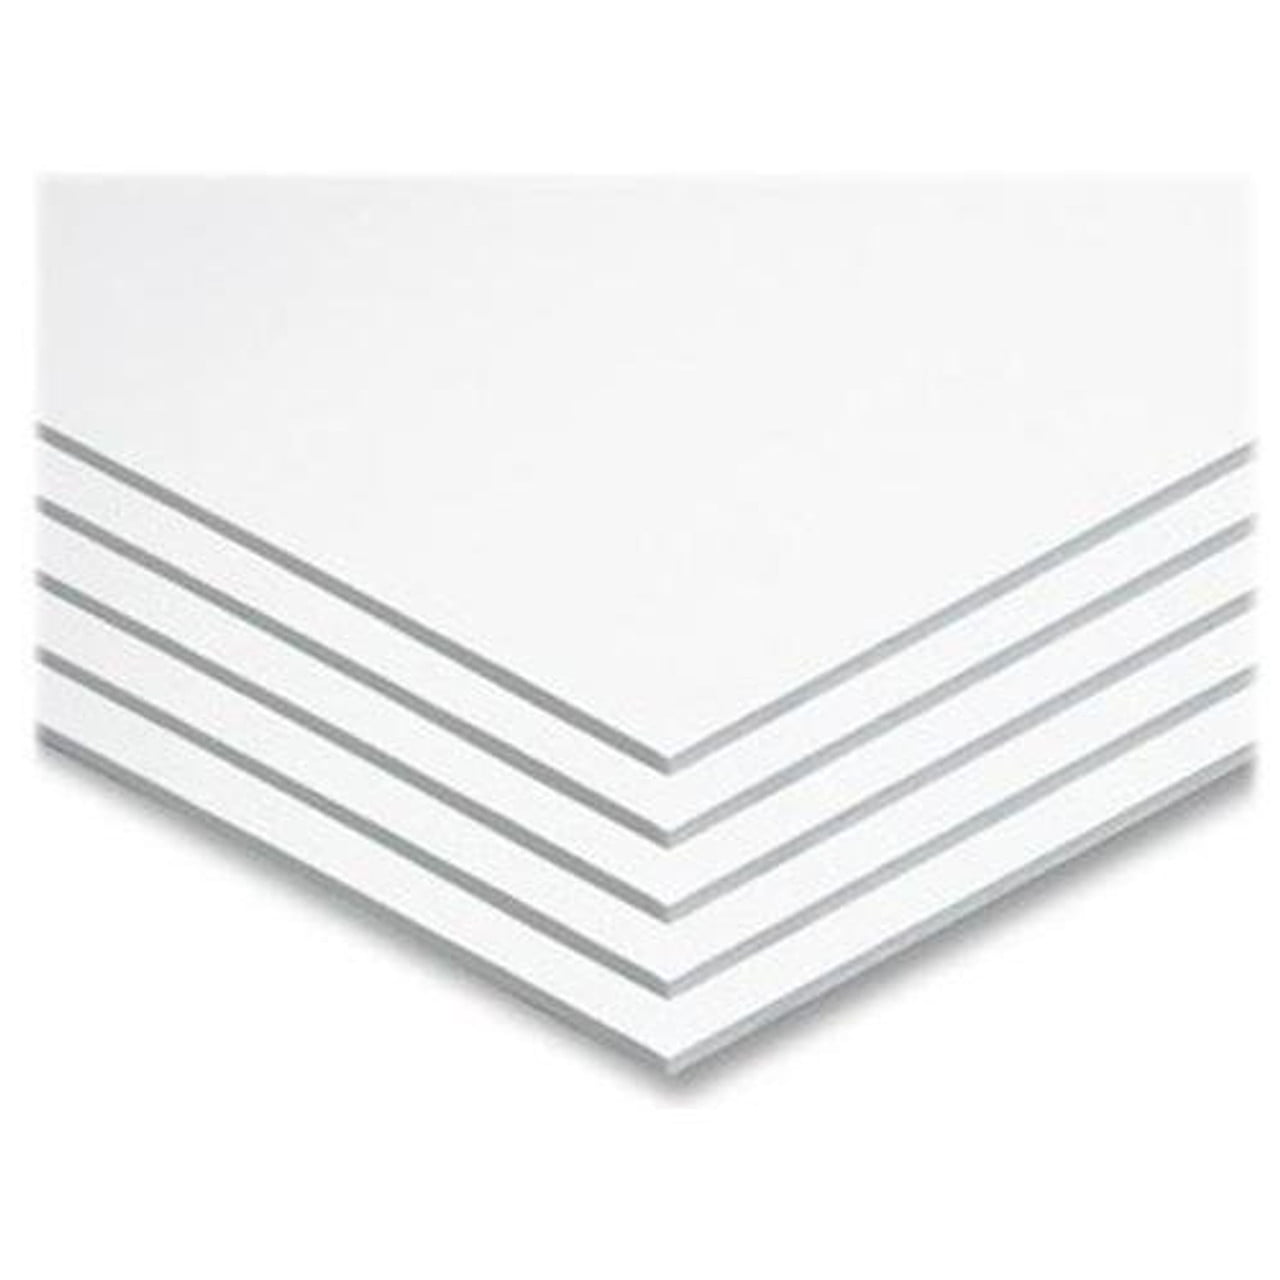 Poster Board White Paper Display 11”x14” Pack of 5